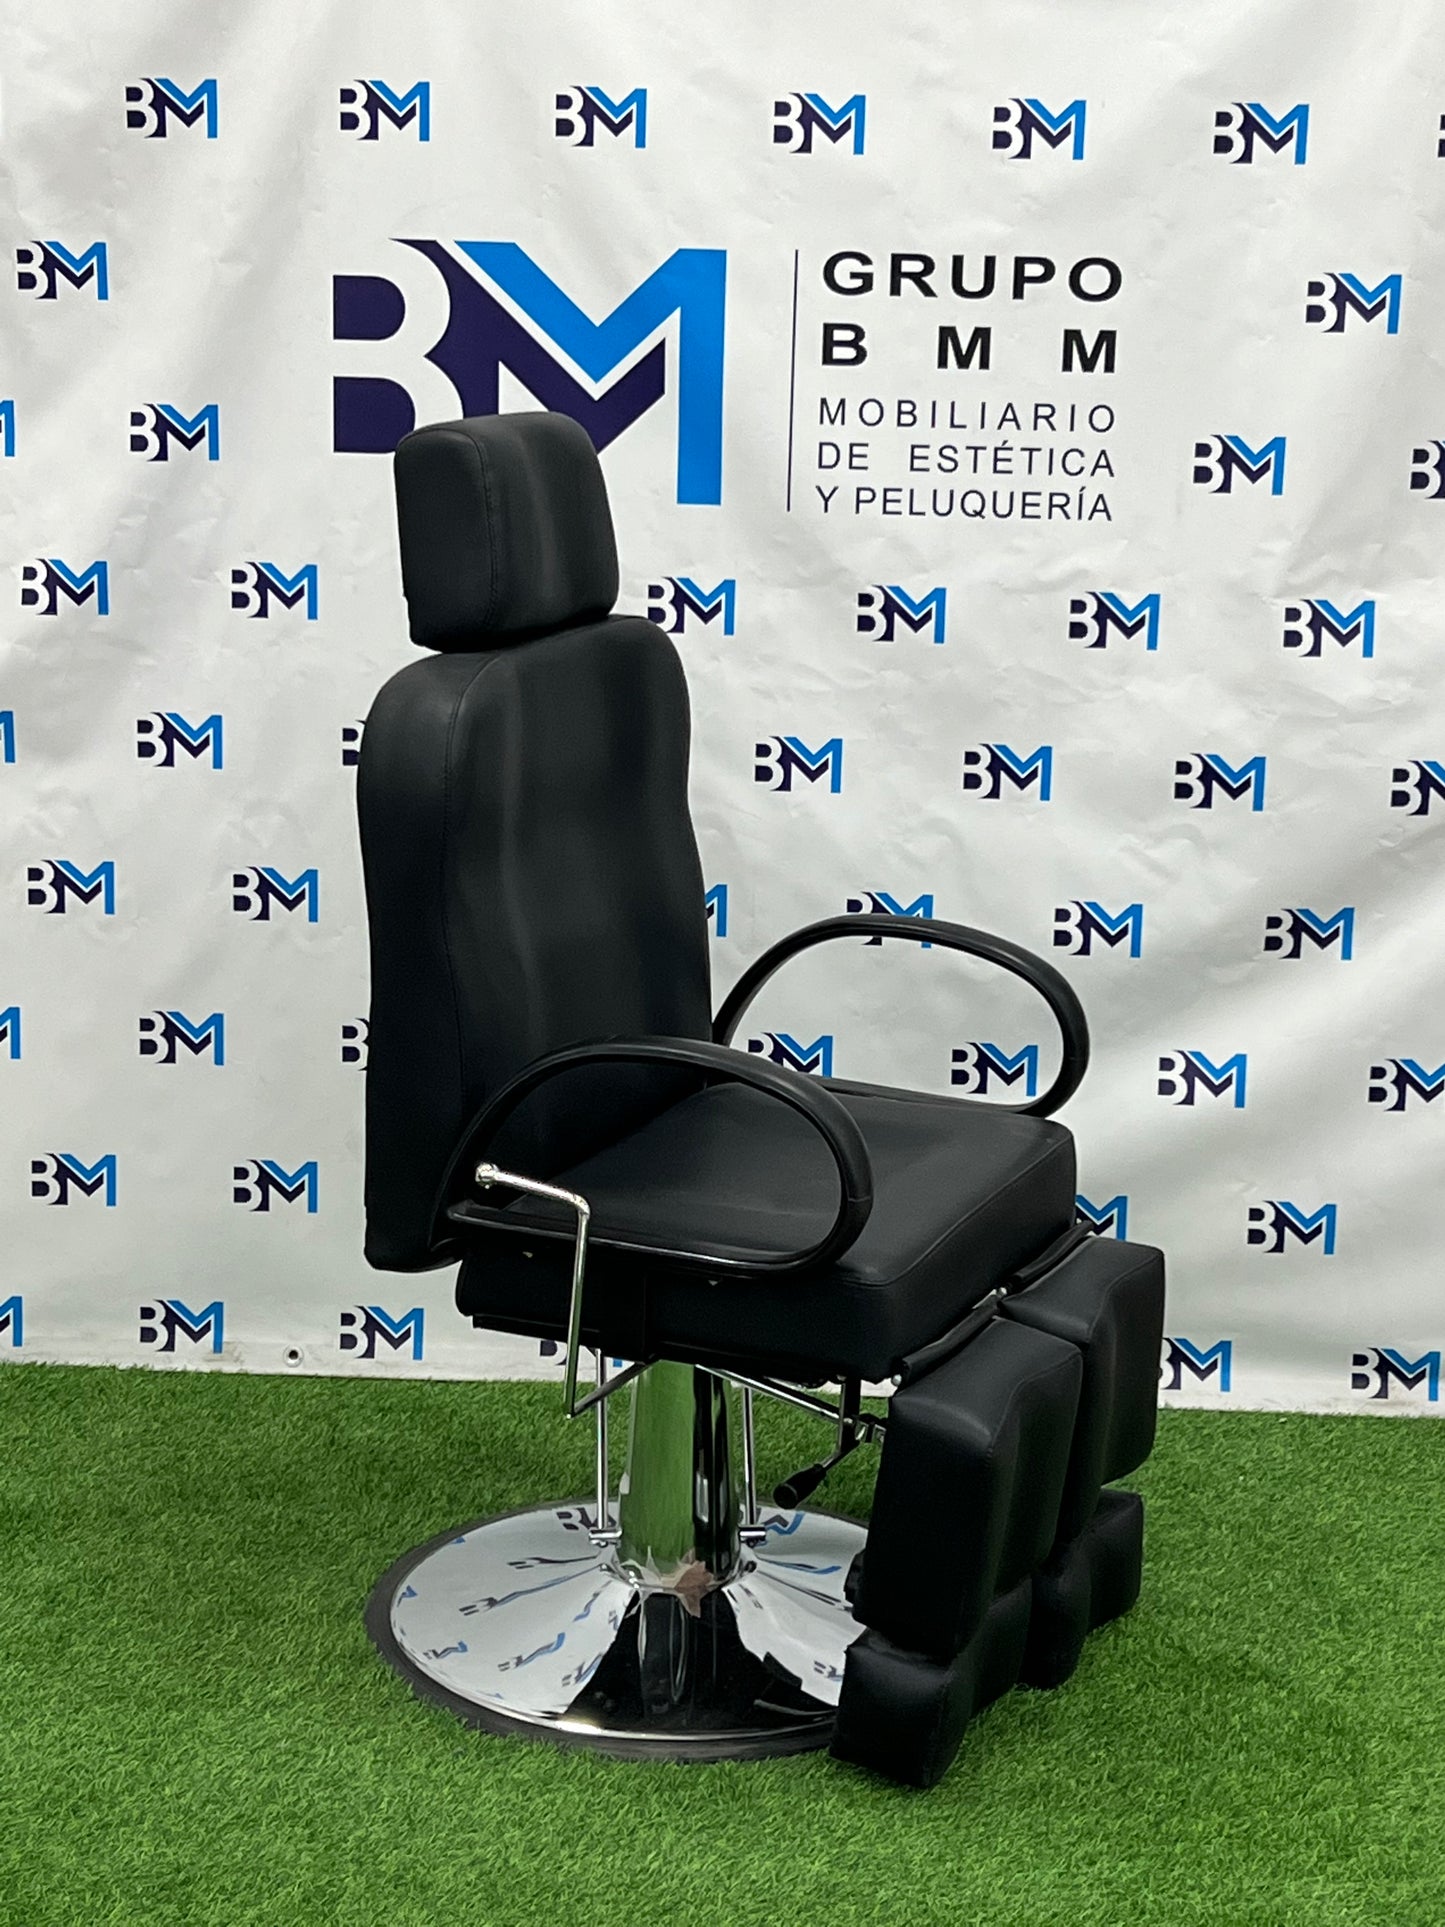 Hydraulic recliner chair with leg straps